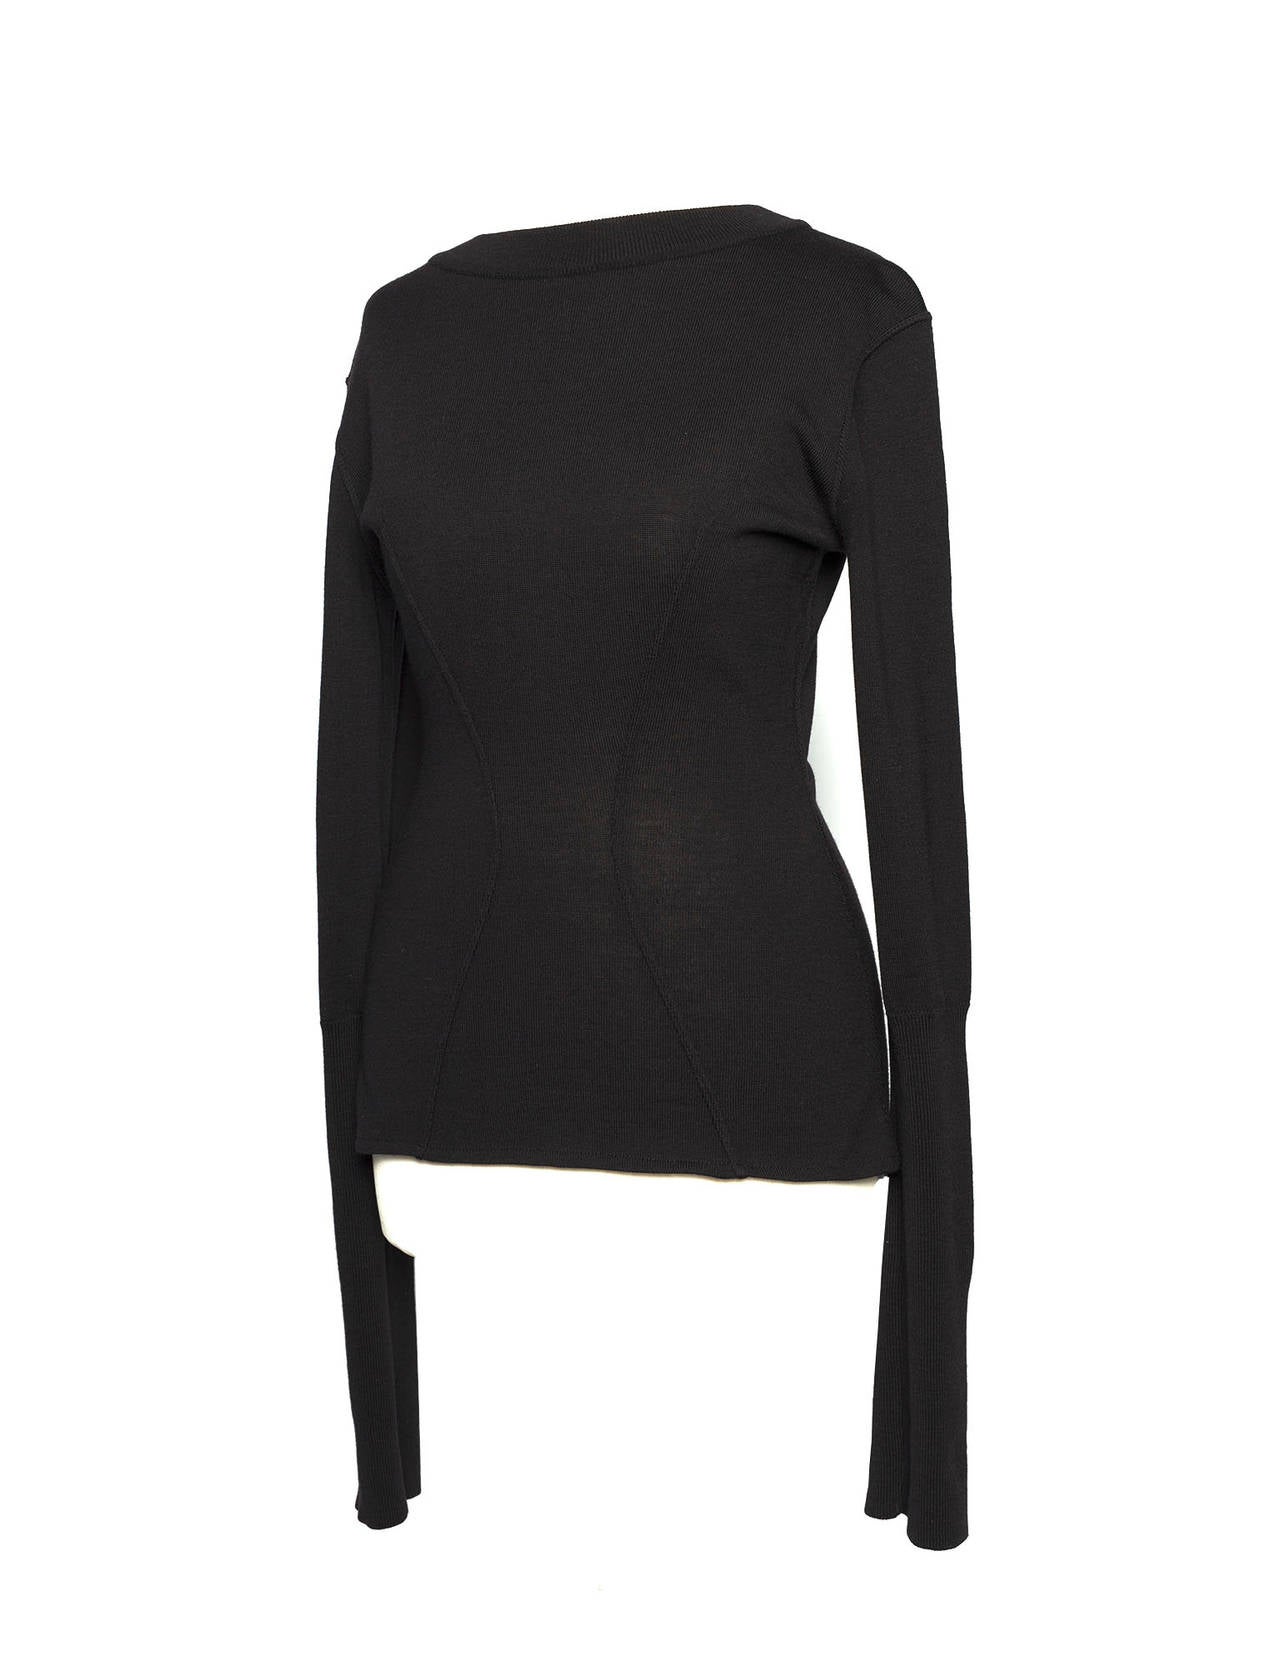 Azzendine Alaia Paris body con knitted top. Top has Curved seams and is tight fitted for that easy body con look.